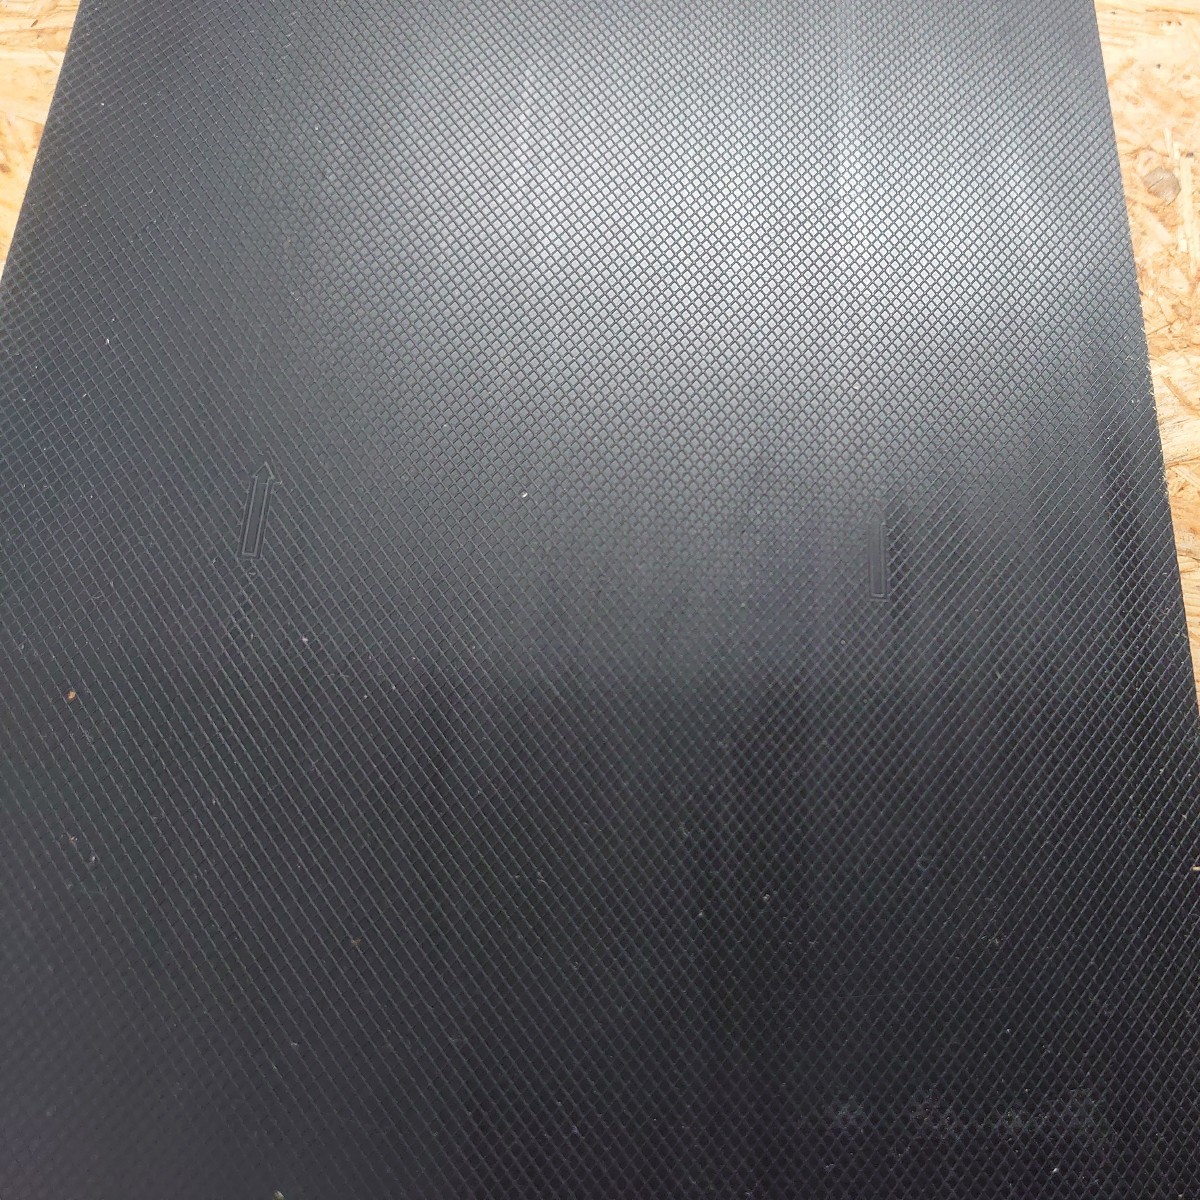 Armstrong Flooring 　フローリング床材　152.4mm×914.4mm 1箱30枚入り×2箱セット